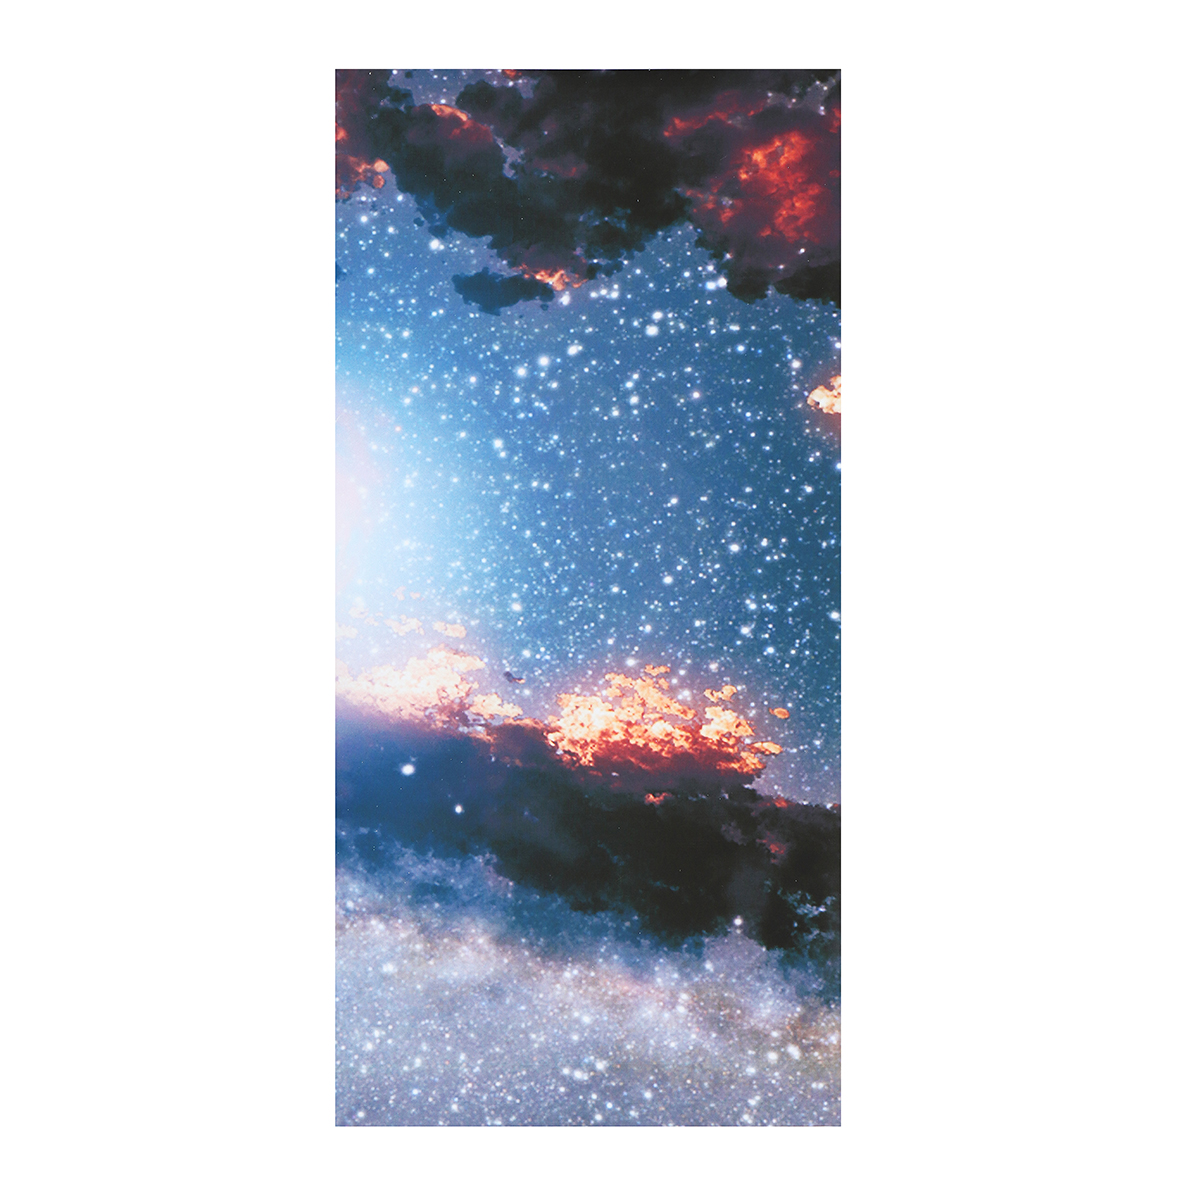 5Pcs-Canvas-Painting-Starry-Sky-Wall-Decorative-Print-Art-Pictures-Frameless-Wall-Hanging-Home-Offic-1803048-6